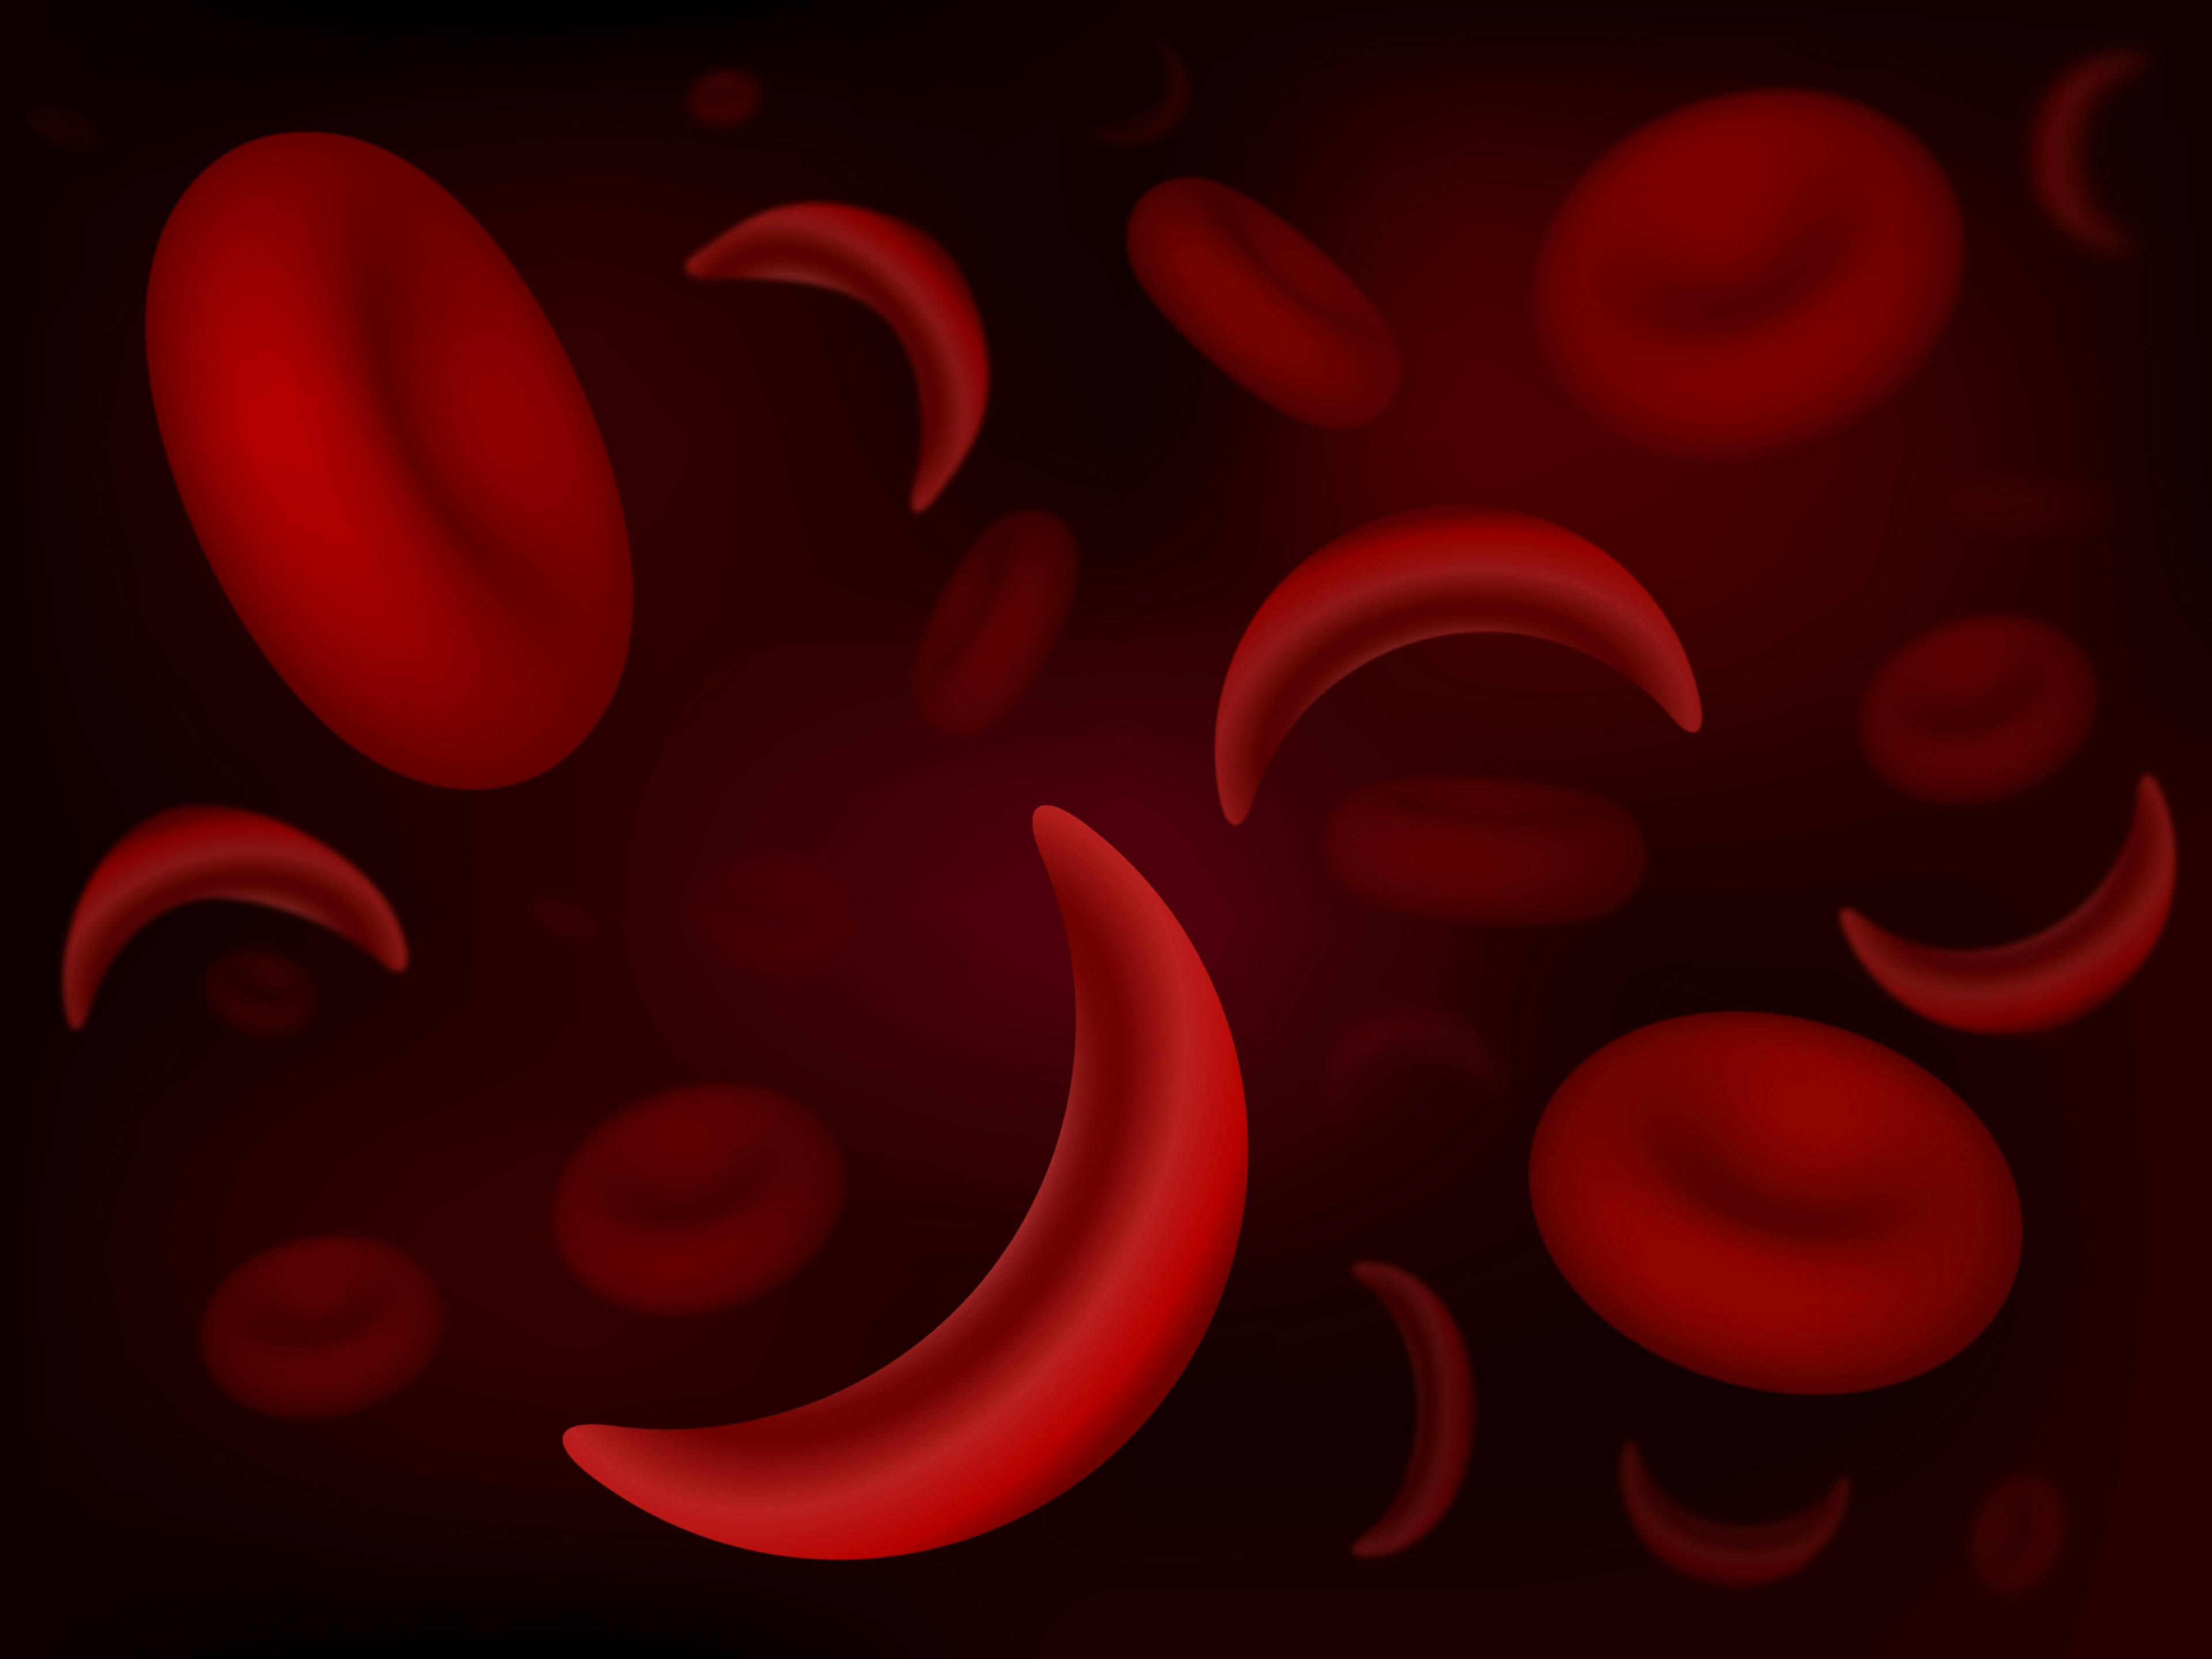 Gene Edited Cell Therapy Improves Fetal Hemoglobin Expression in Patients With Sickle Cell Disease